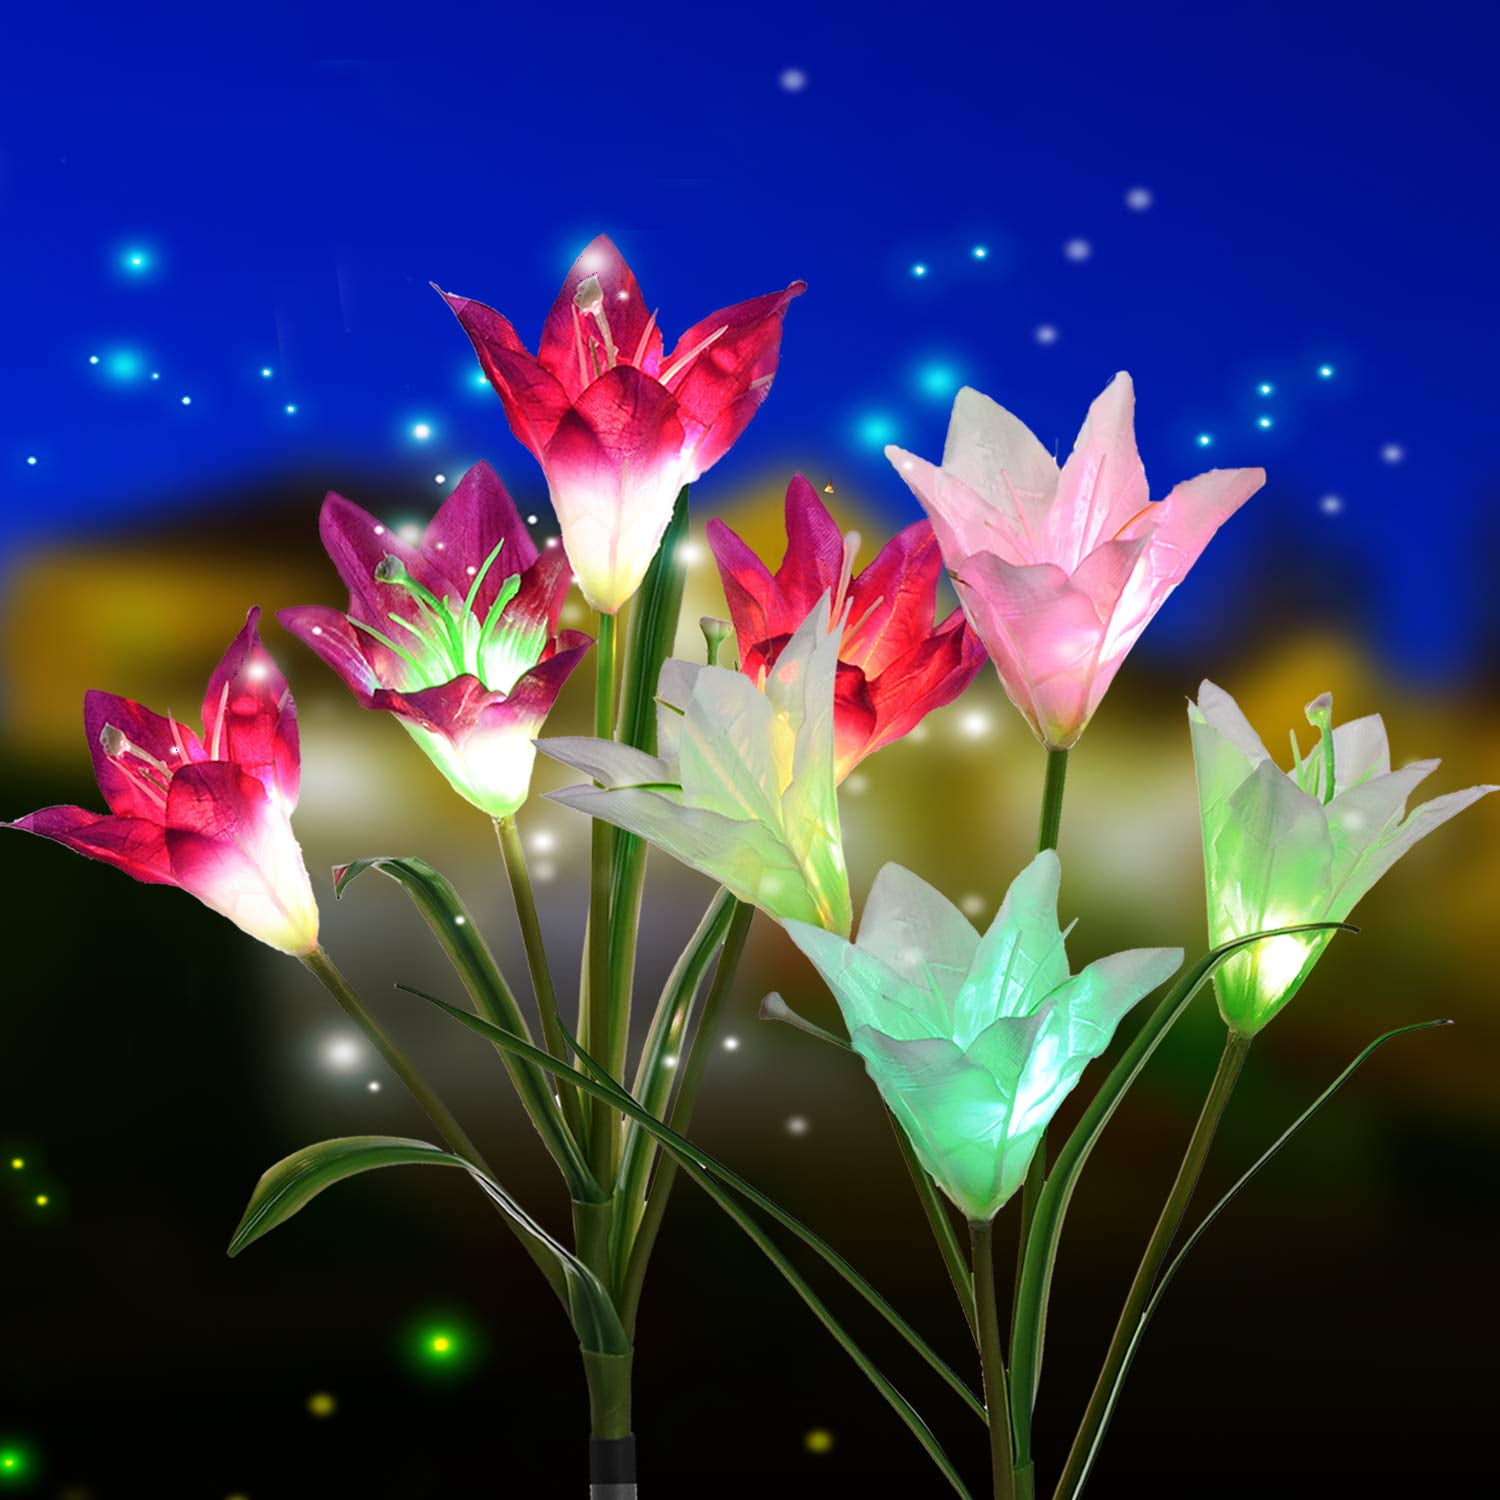 02Pcs LED Solar Powered Flowers Color Changing Stake Lights Yard Garden Decor. 